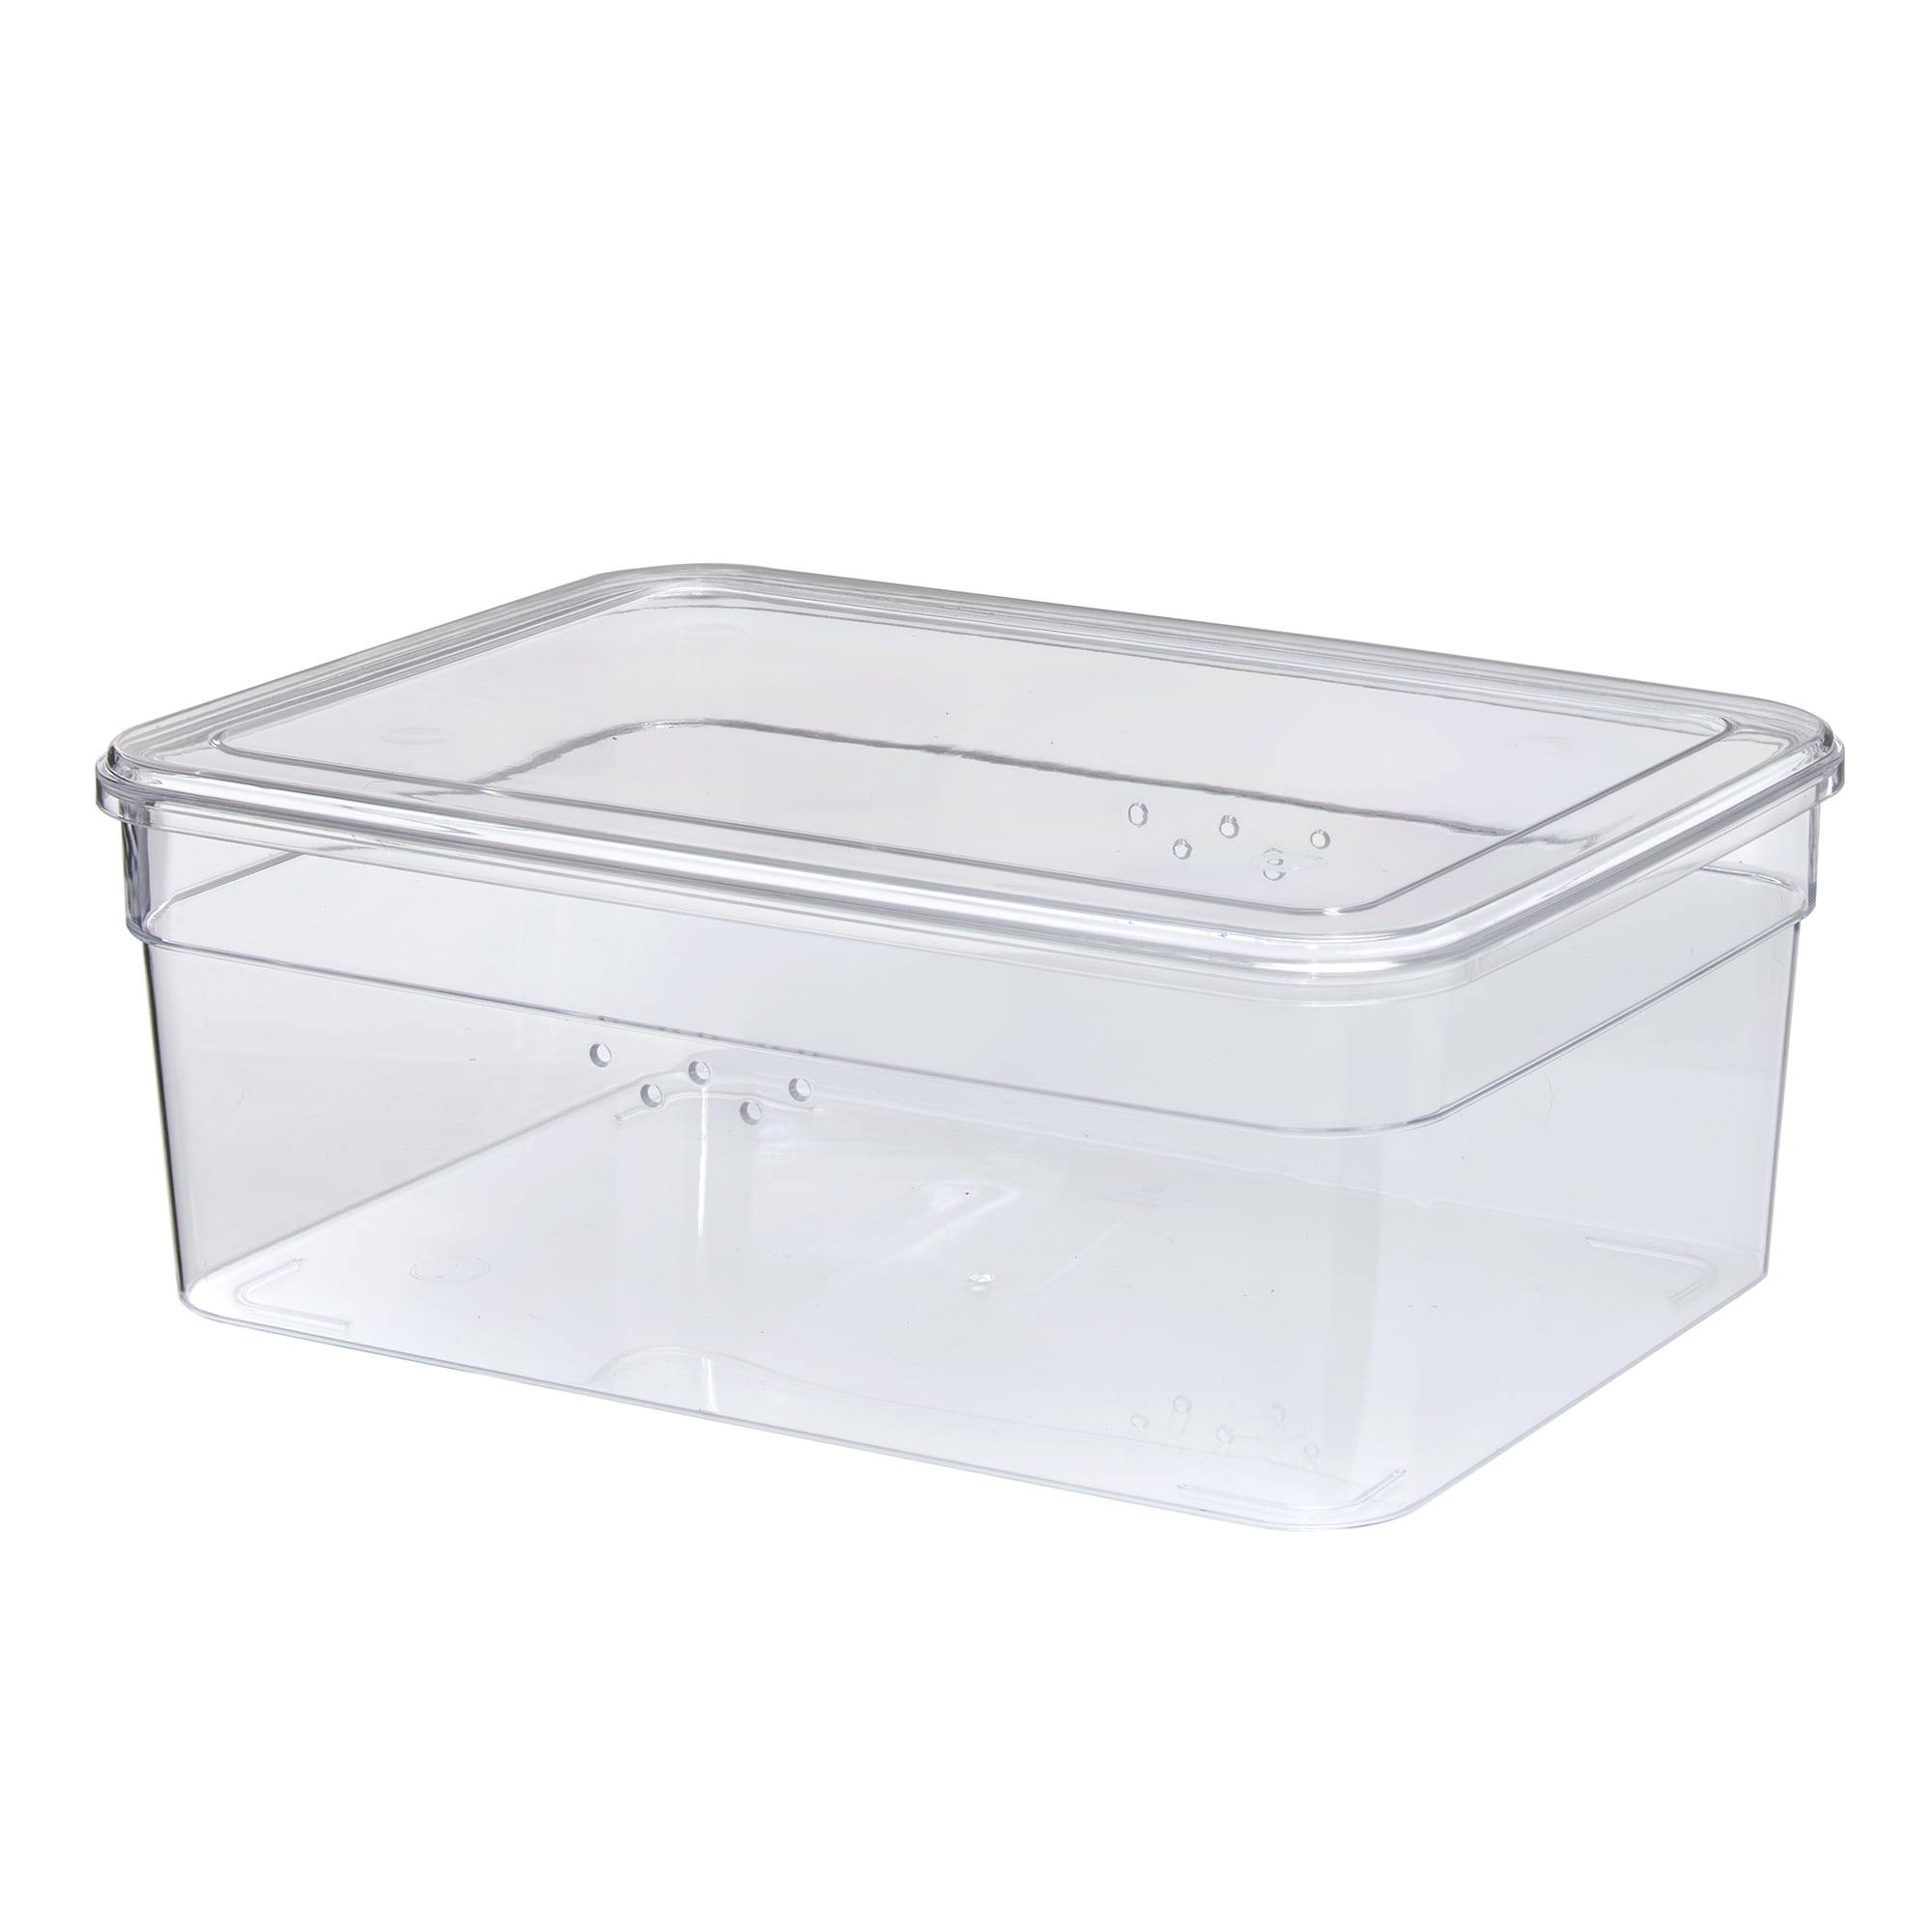 Superb Quality plastic shoe box With Luring Discounts 